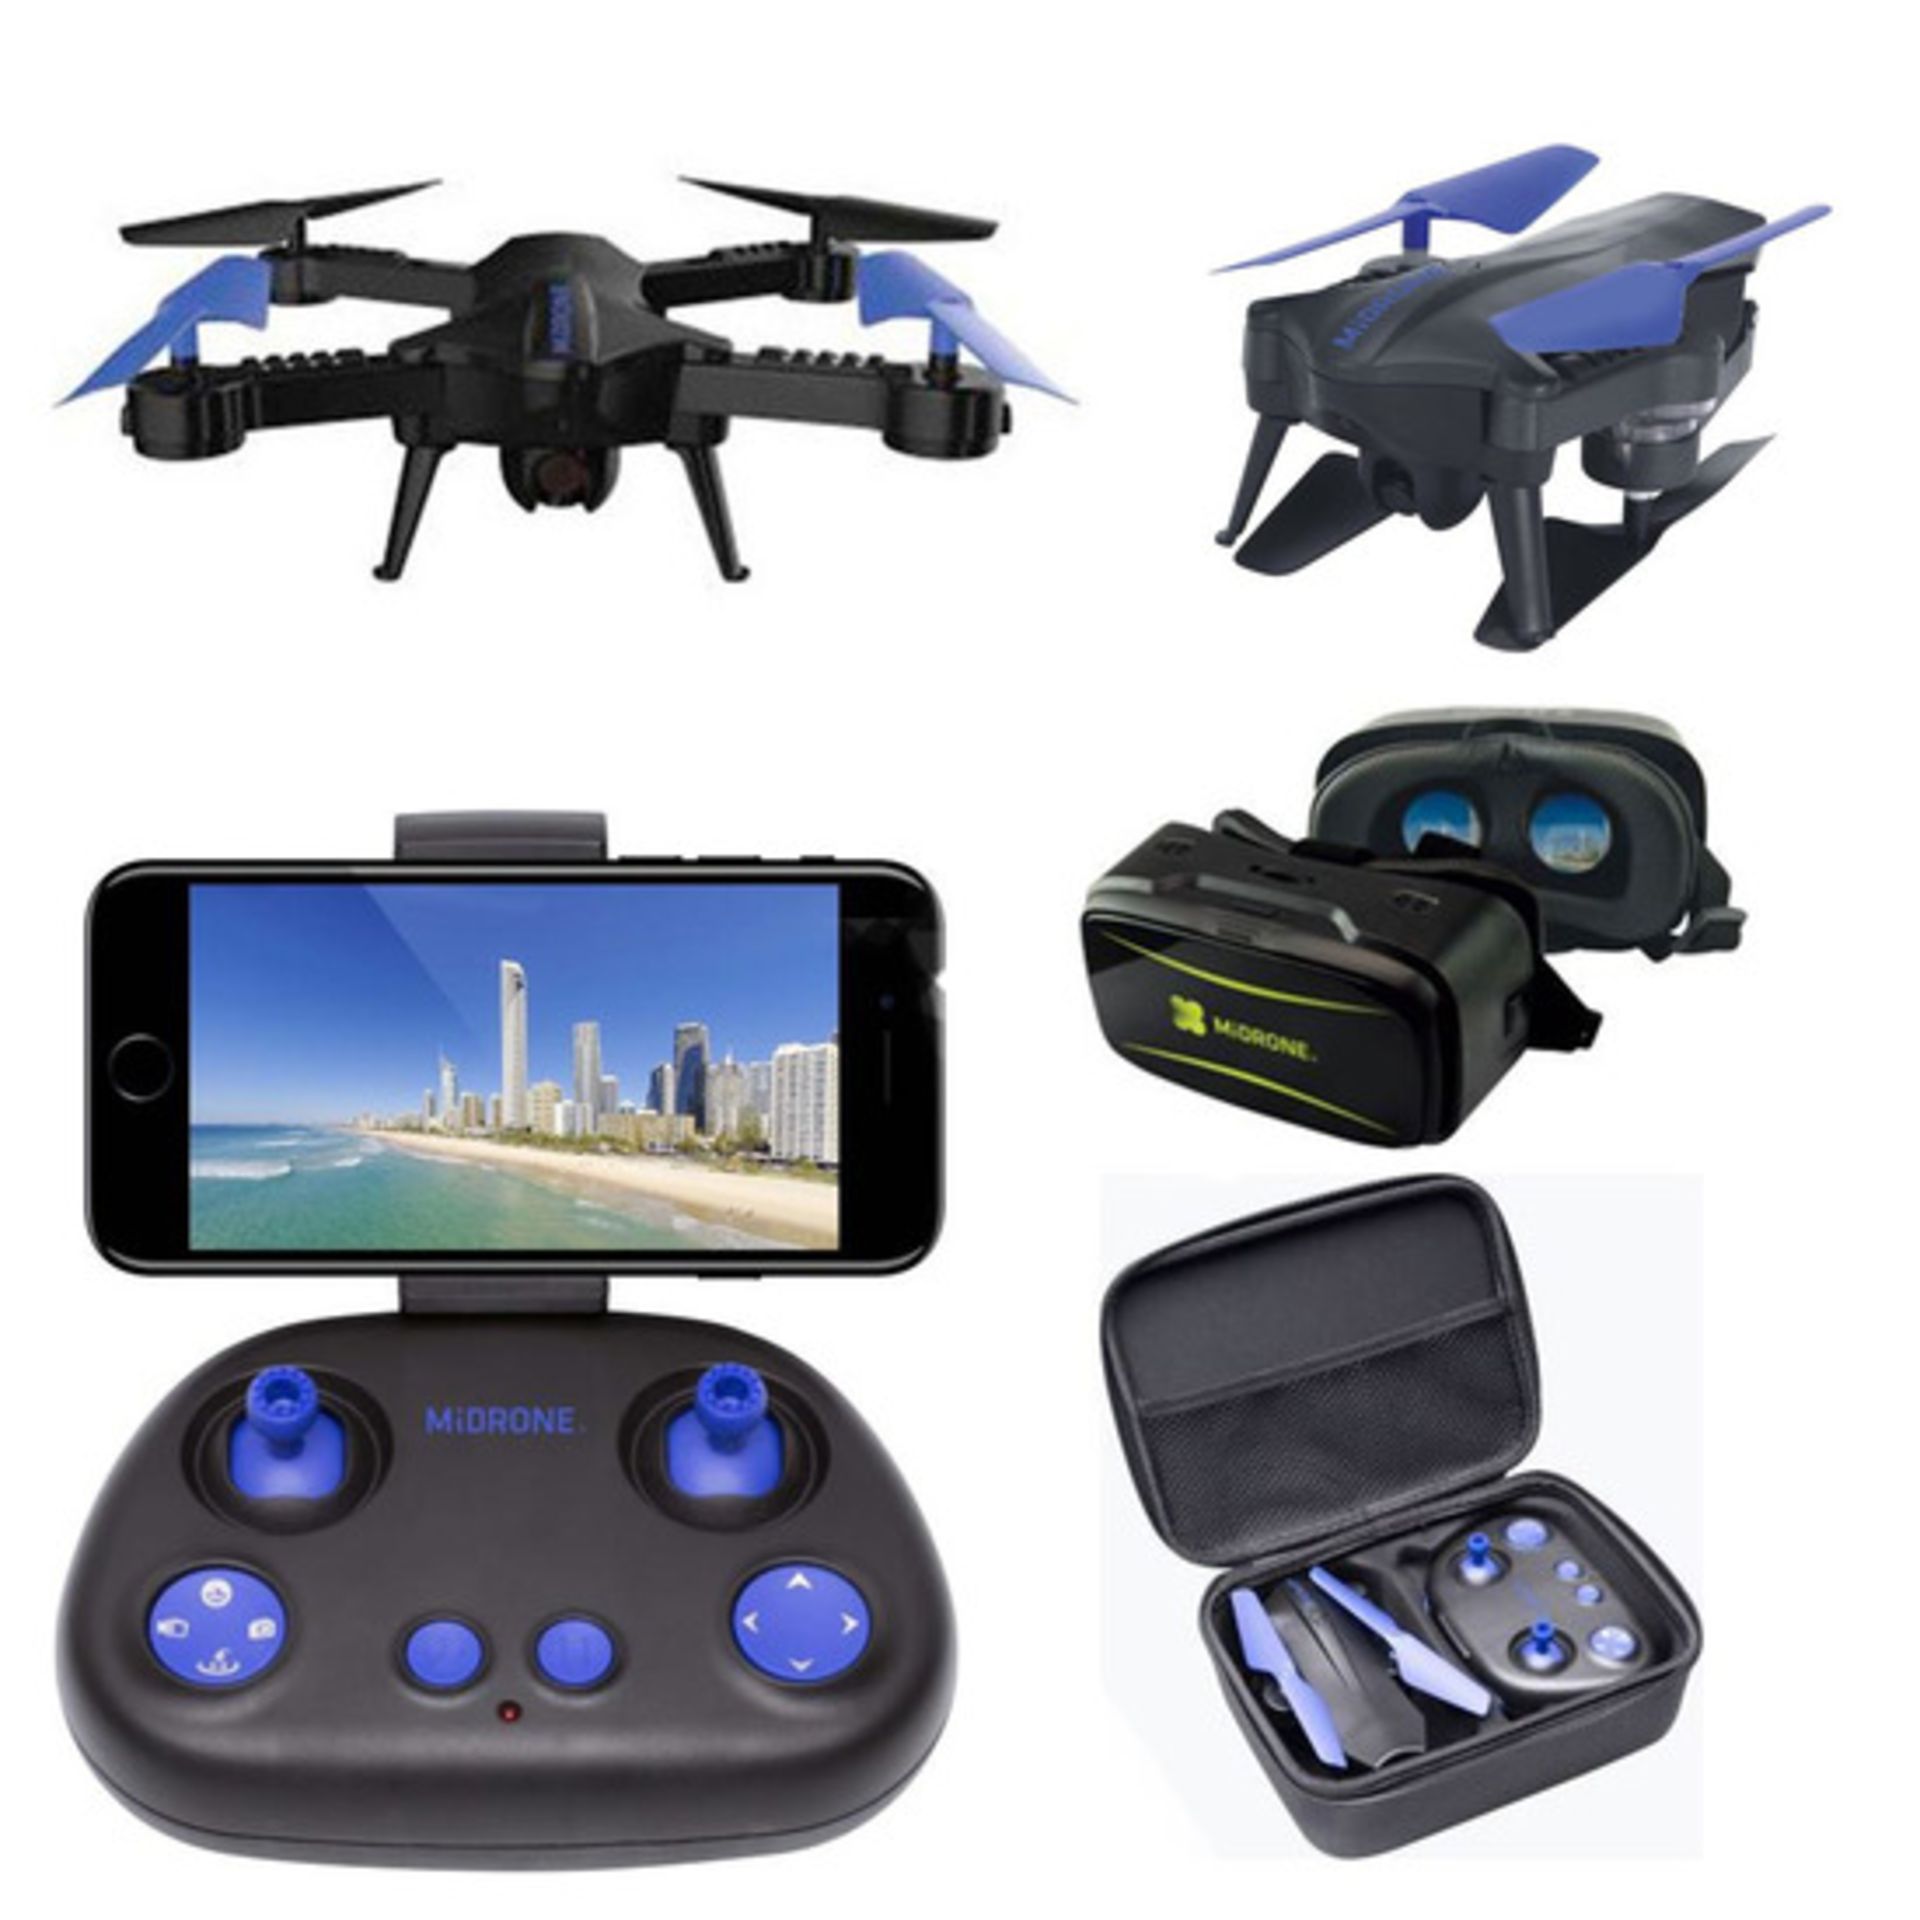 V Brand New MiDrone HD WiFi Drone With Intergrated Full HD Camera PLUS VR Kit (Goggles & Case) -